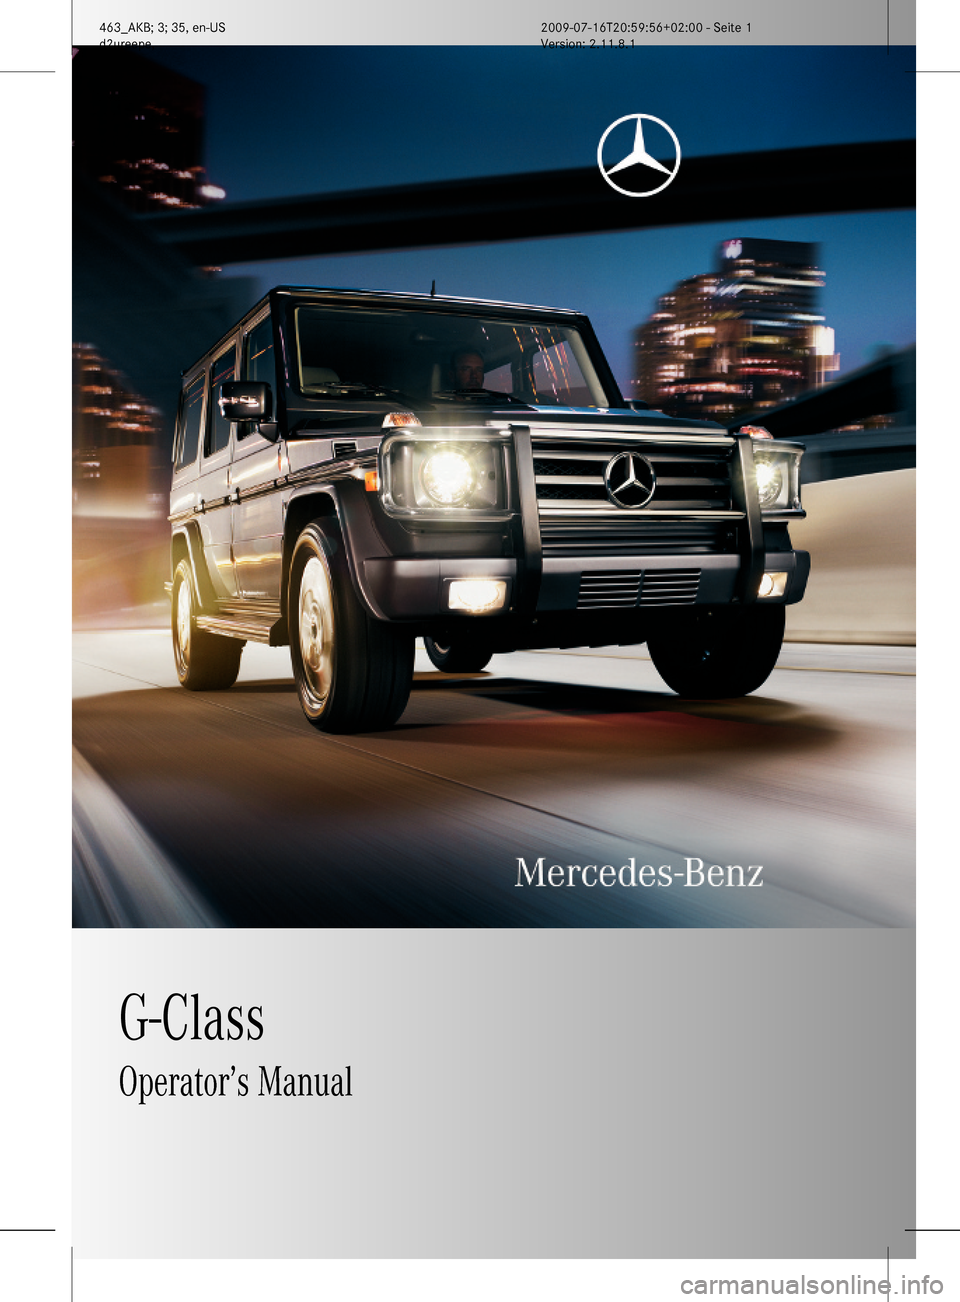 MERCEDES-BENZ G55AMG 2010 W463 Owners Manual G-ClassOperator’s Manual463_AKB; 3; 35, en-USd2ureepe,Version: 2.11.8.12009-07-16T20:59:56+02:00 - Seite 1    